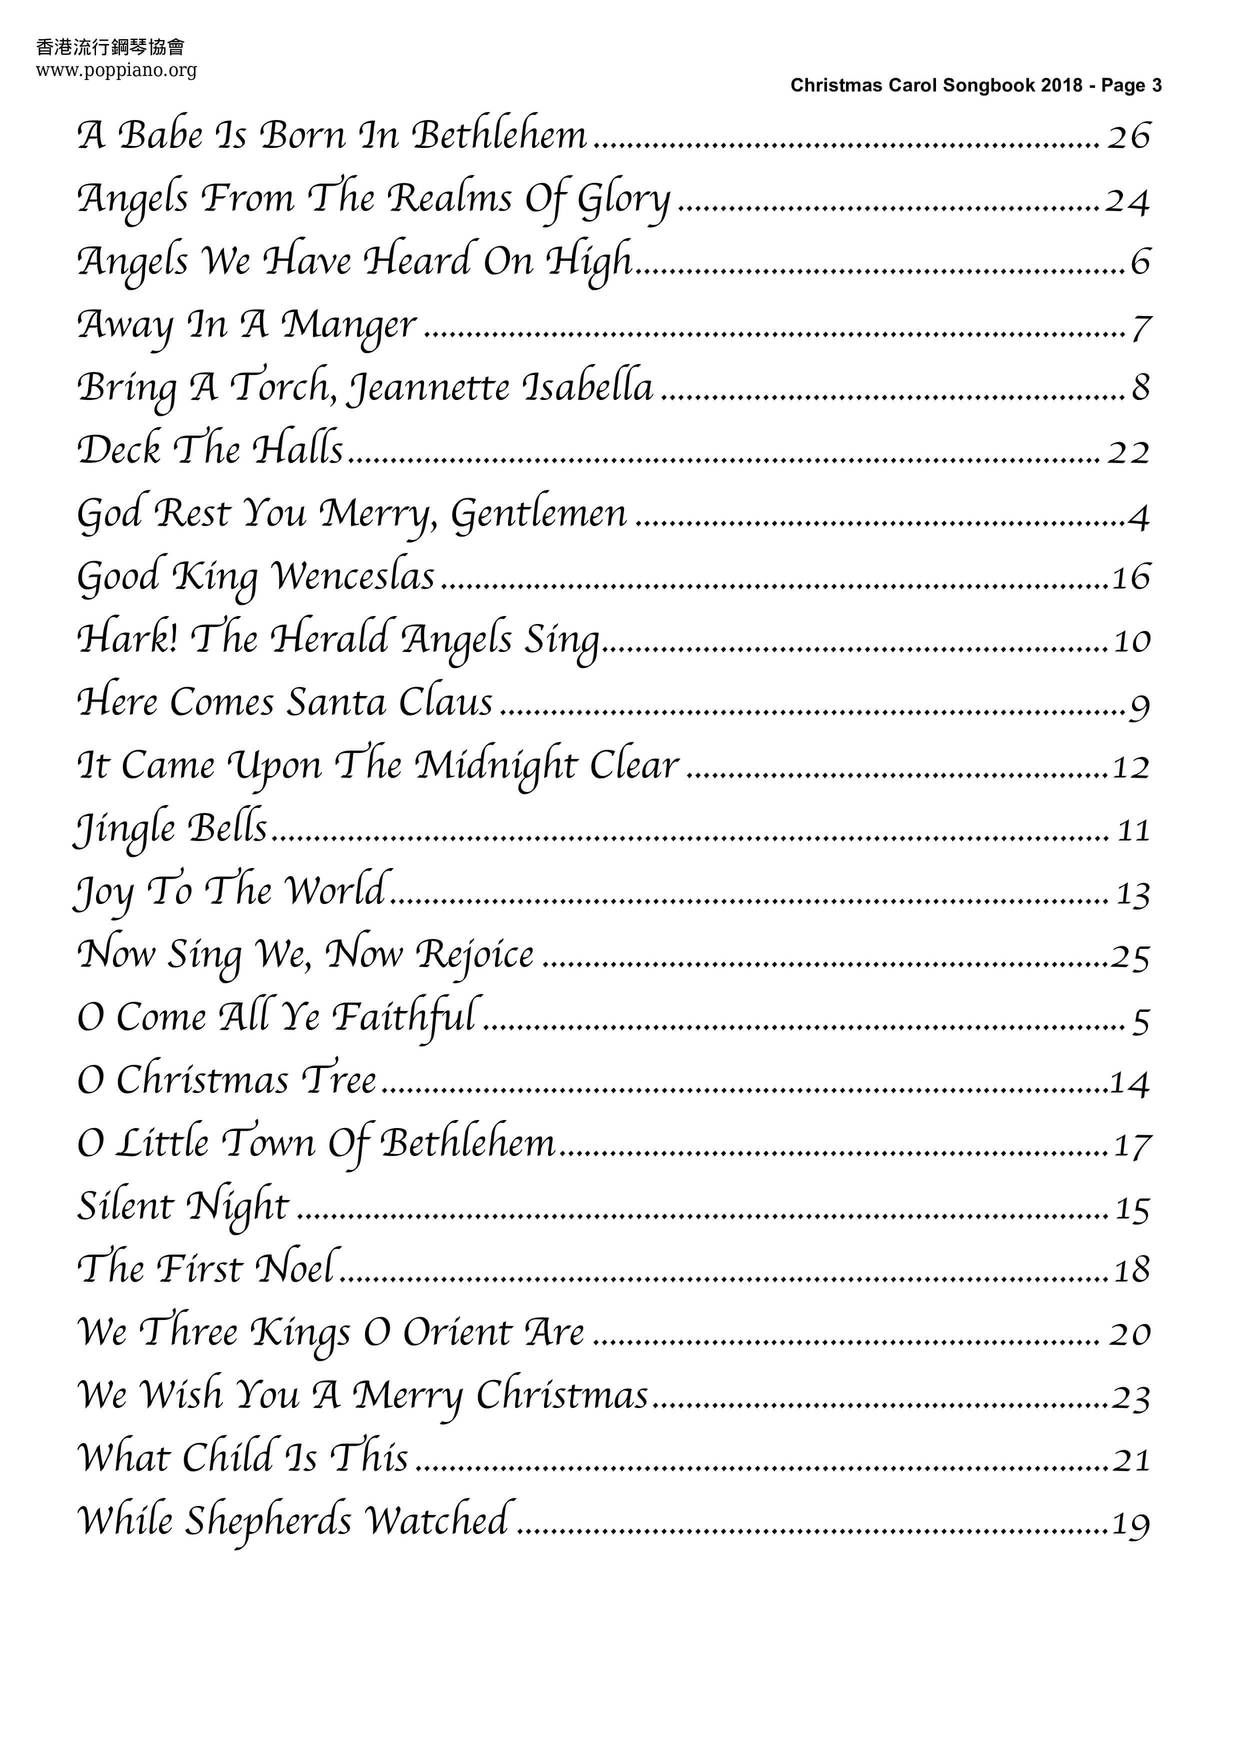 Christmas Songbook 28 Pagesピアノ譜